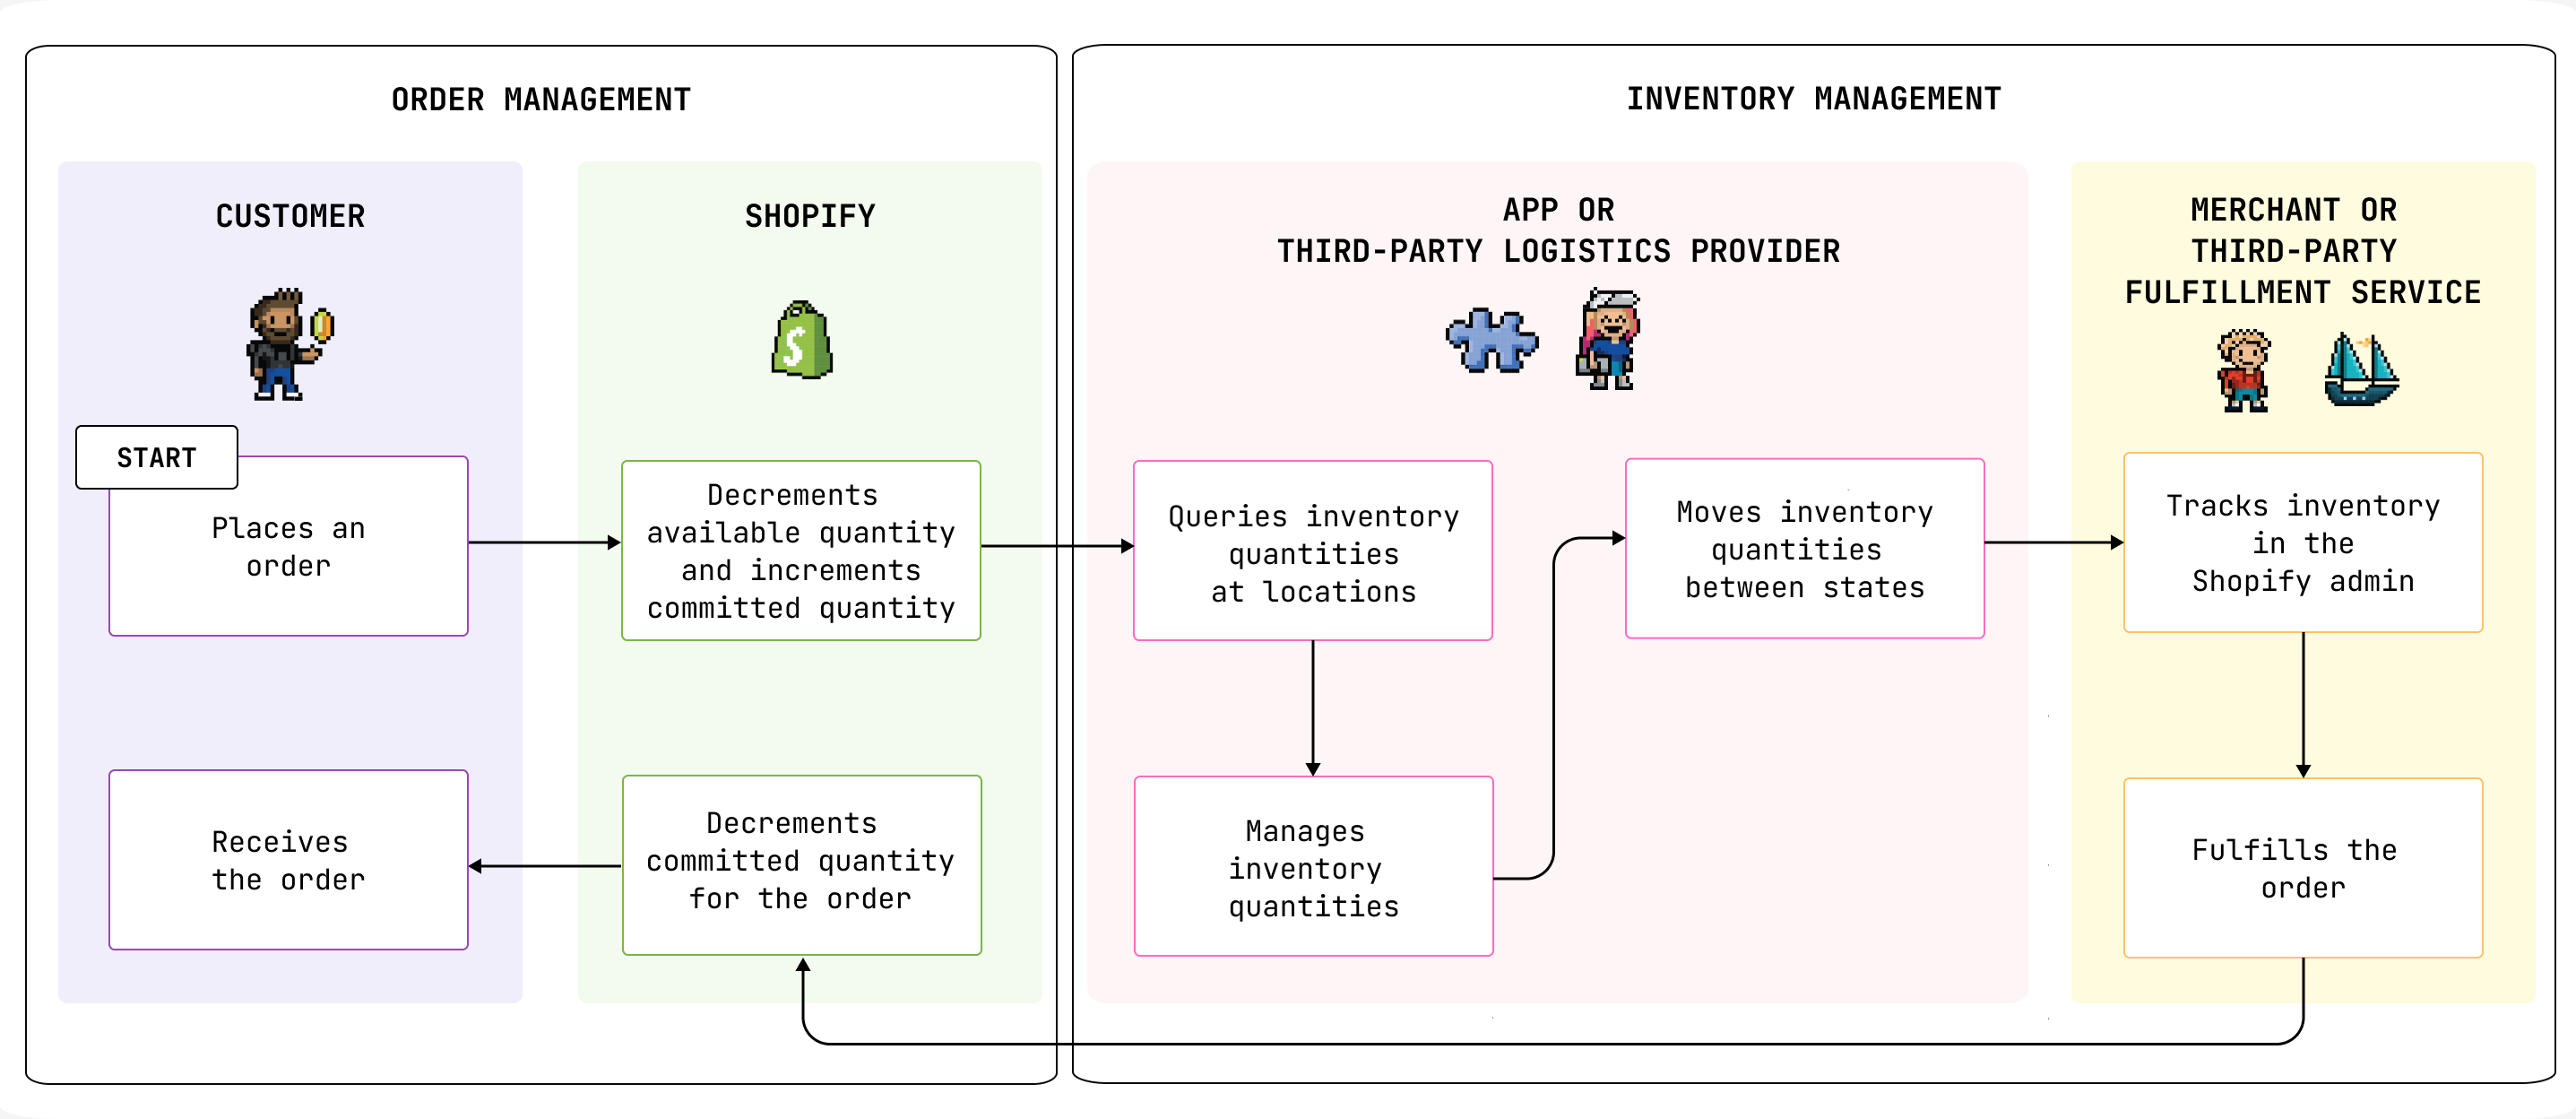 A diagram showing some of the inventory management activities that an app or third-party logistics provider can perform in the context of an order cycle.